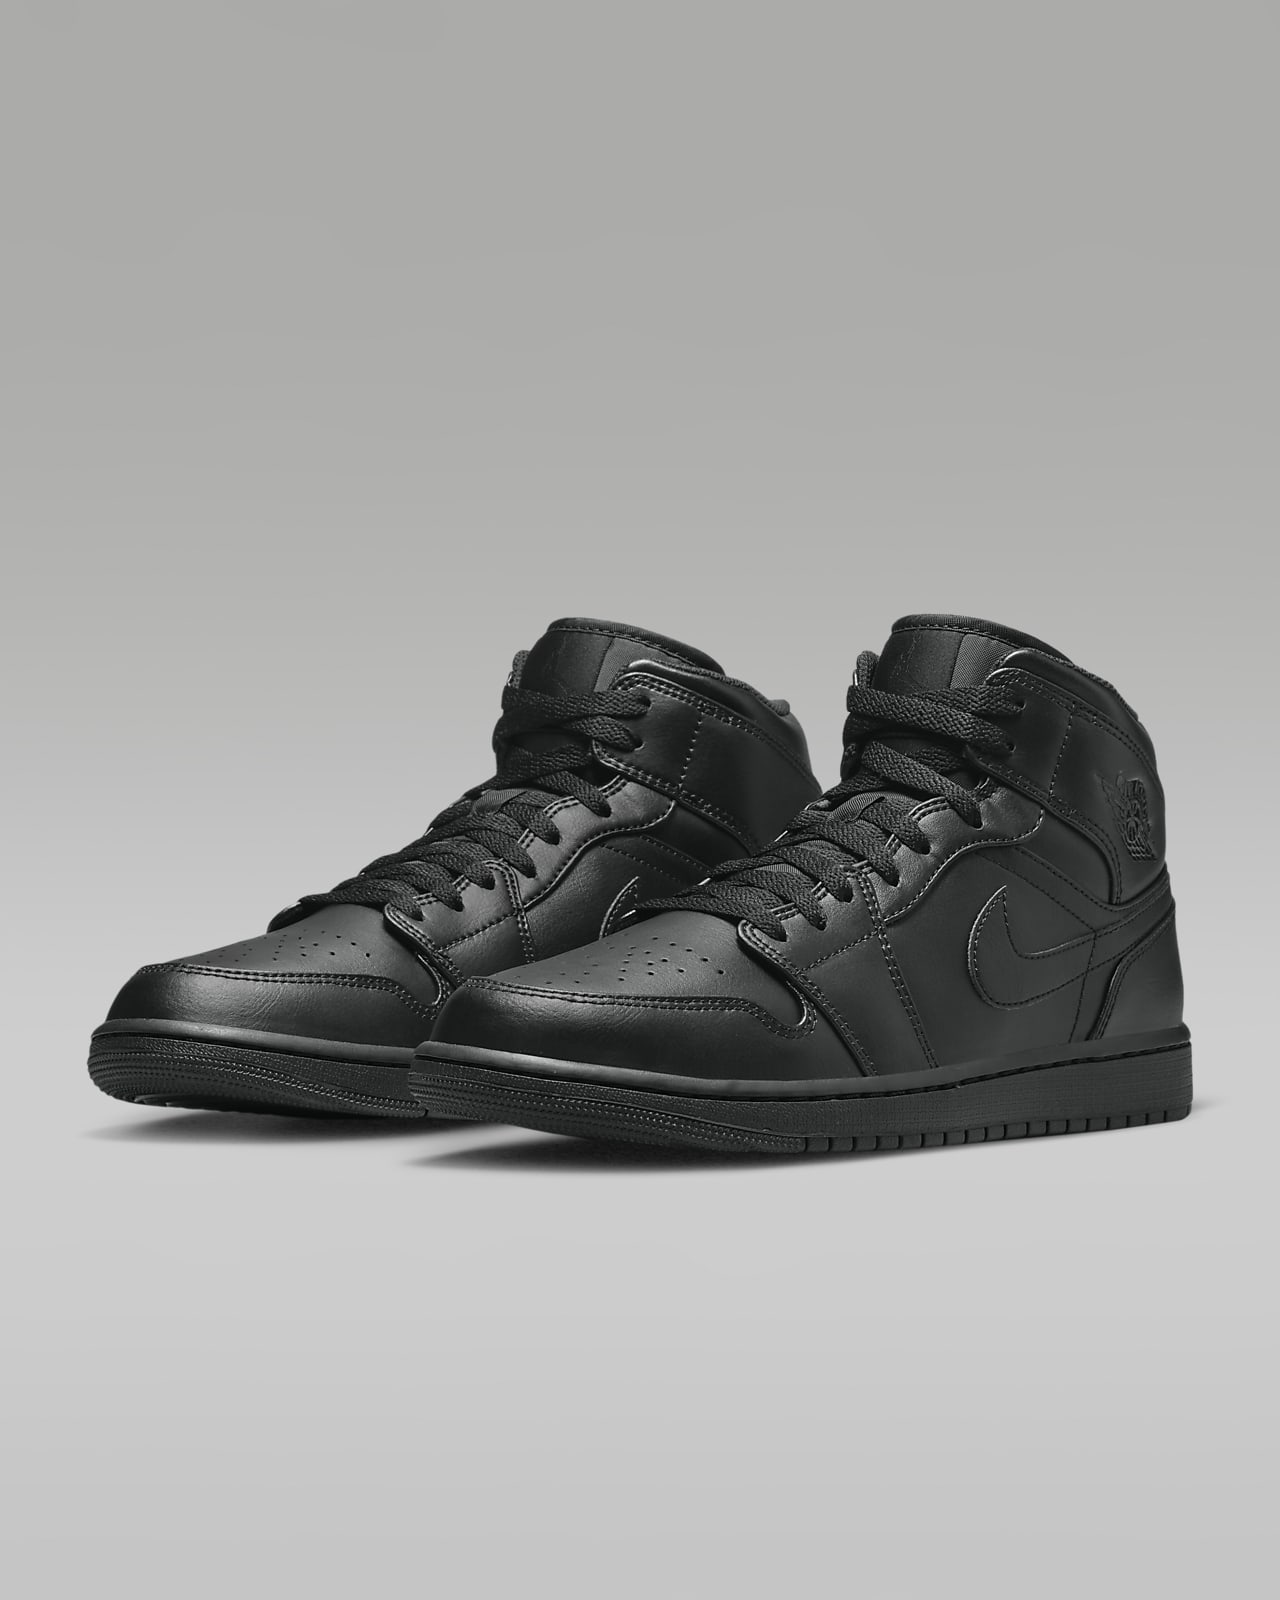 Check Out the Best Black Sneaker Styles by Nike. Nike.com